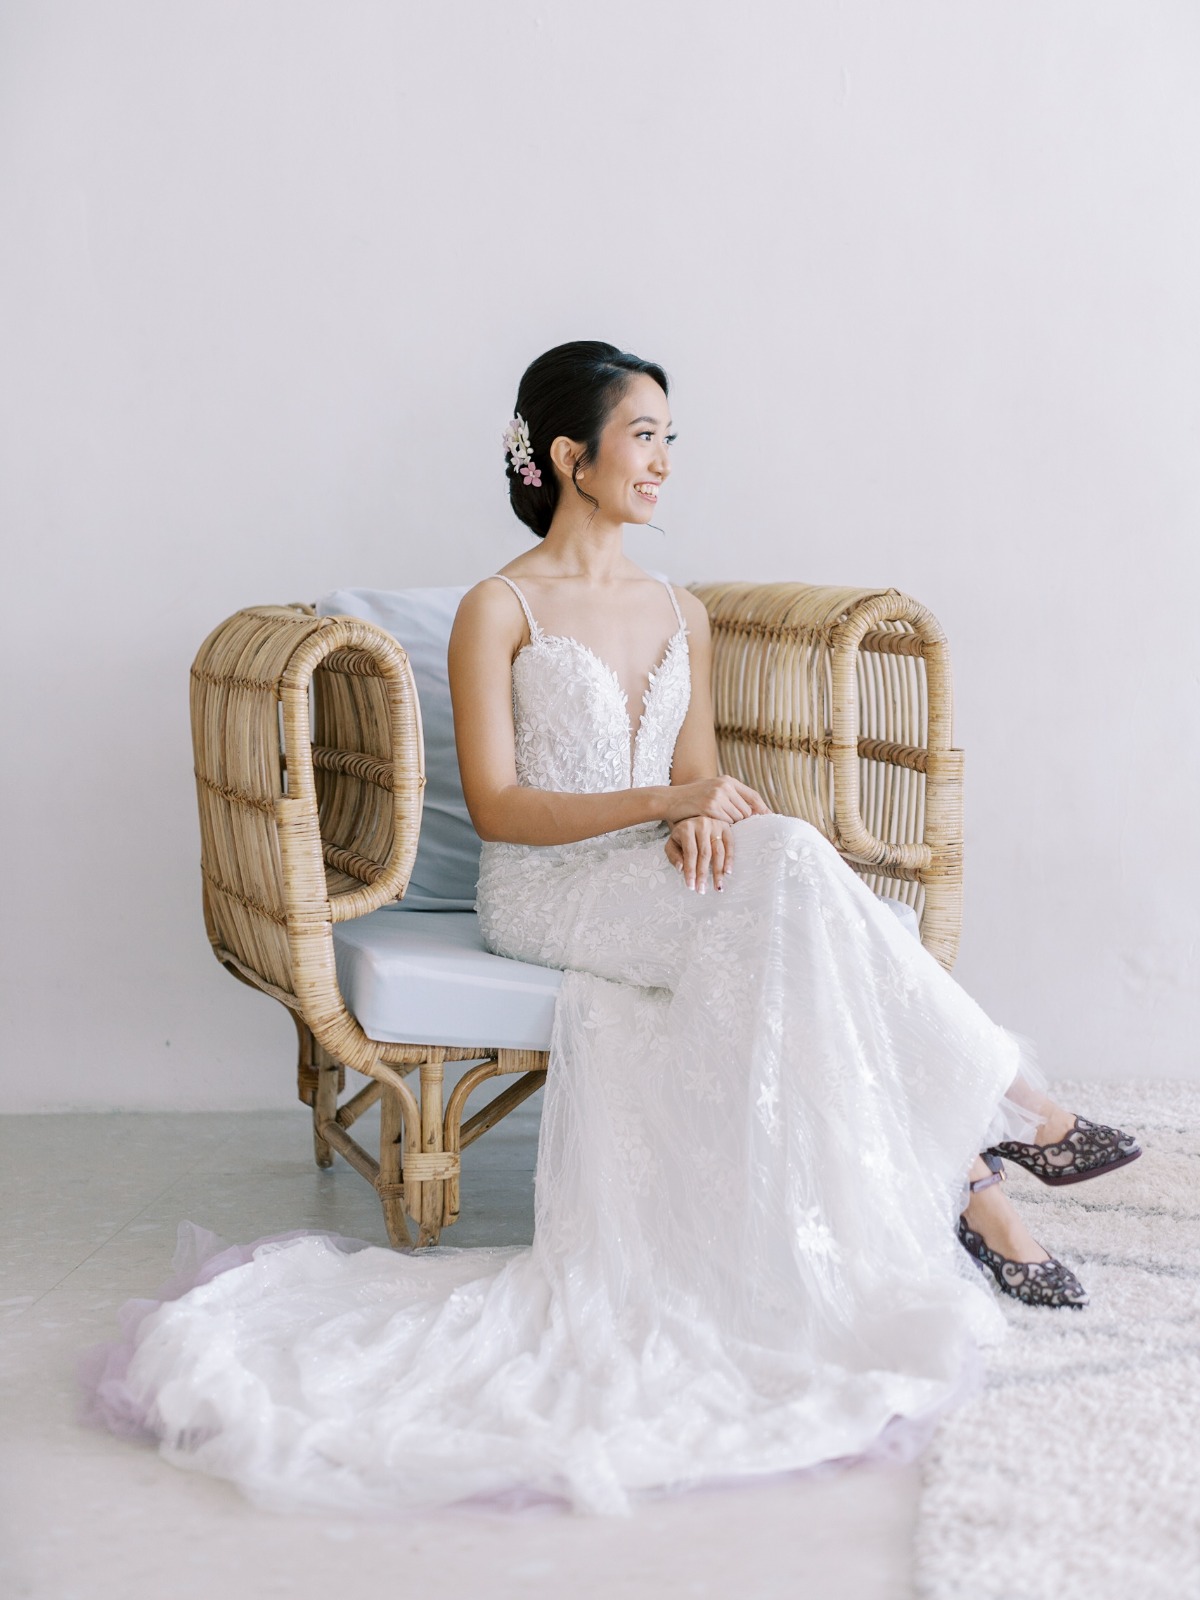 Portrait of bride sitting on wicker chair with legs crossed